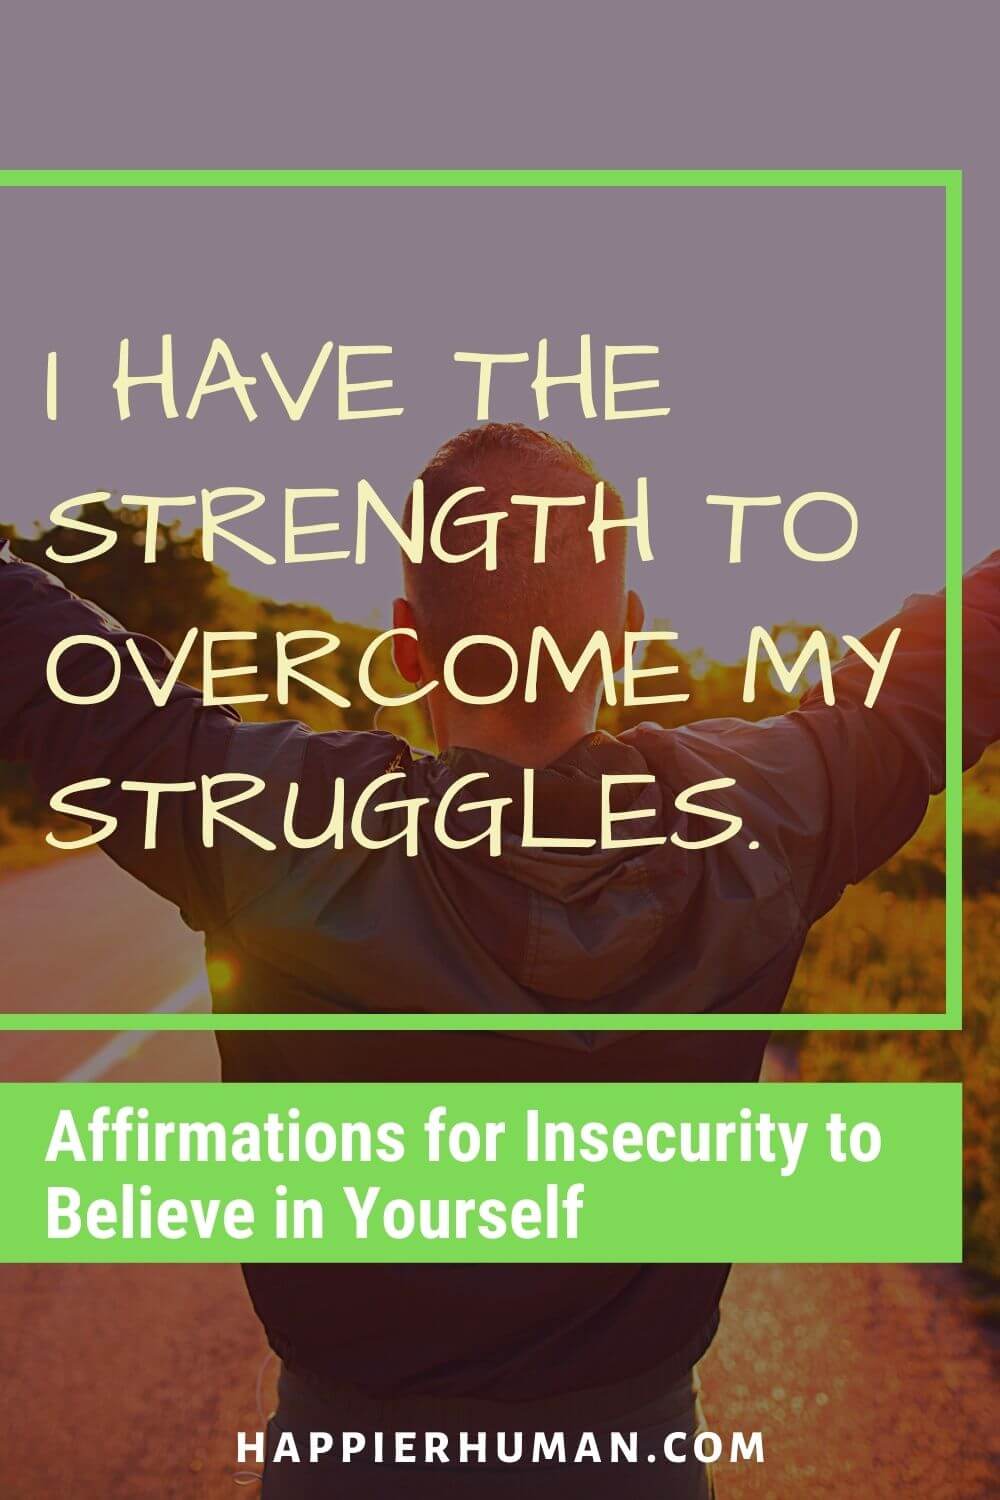 Affirmations for Insecurity - I have the strength to overcome my struggles. | good affirmations for insecurity | words of affirmation for insecurity | affirmations to overcome insecurity